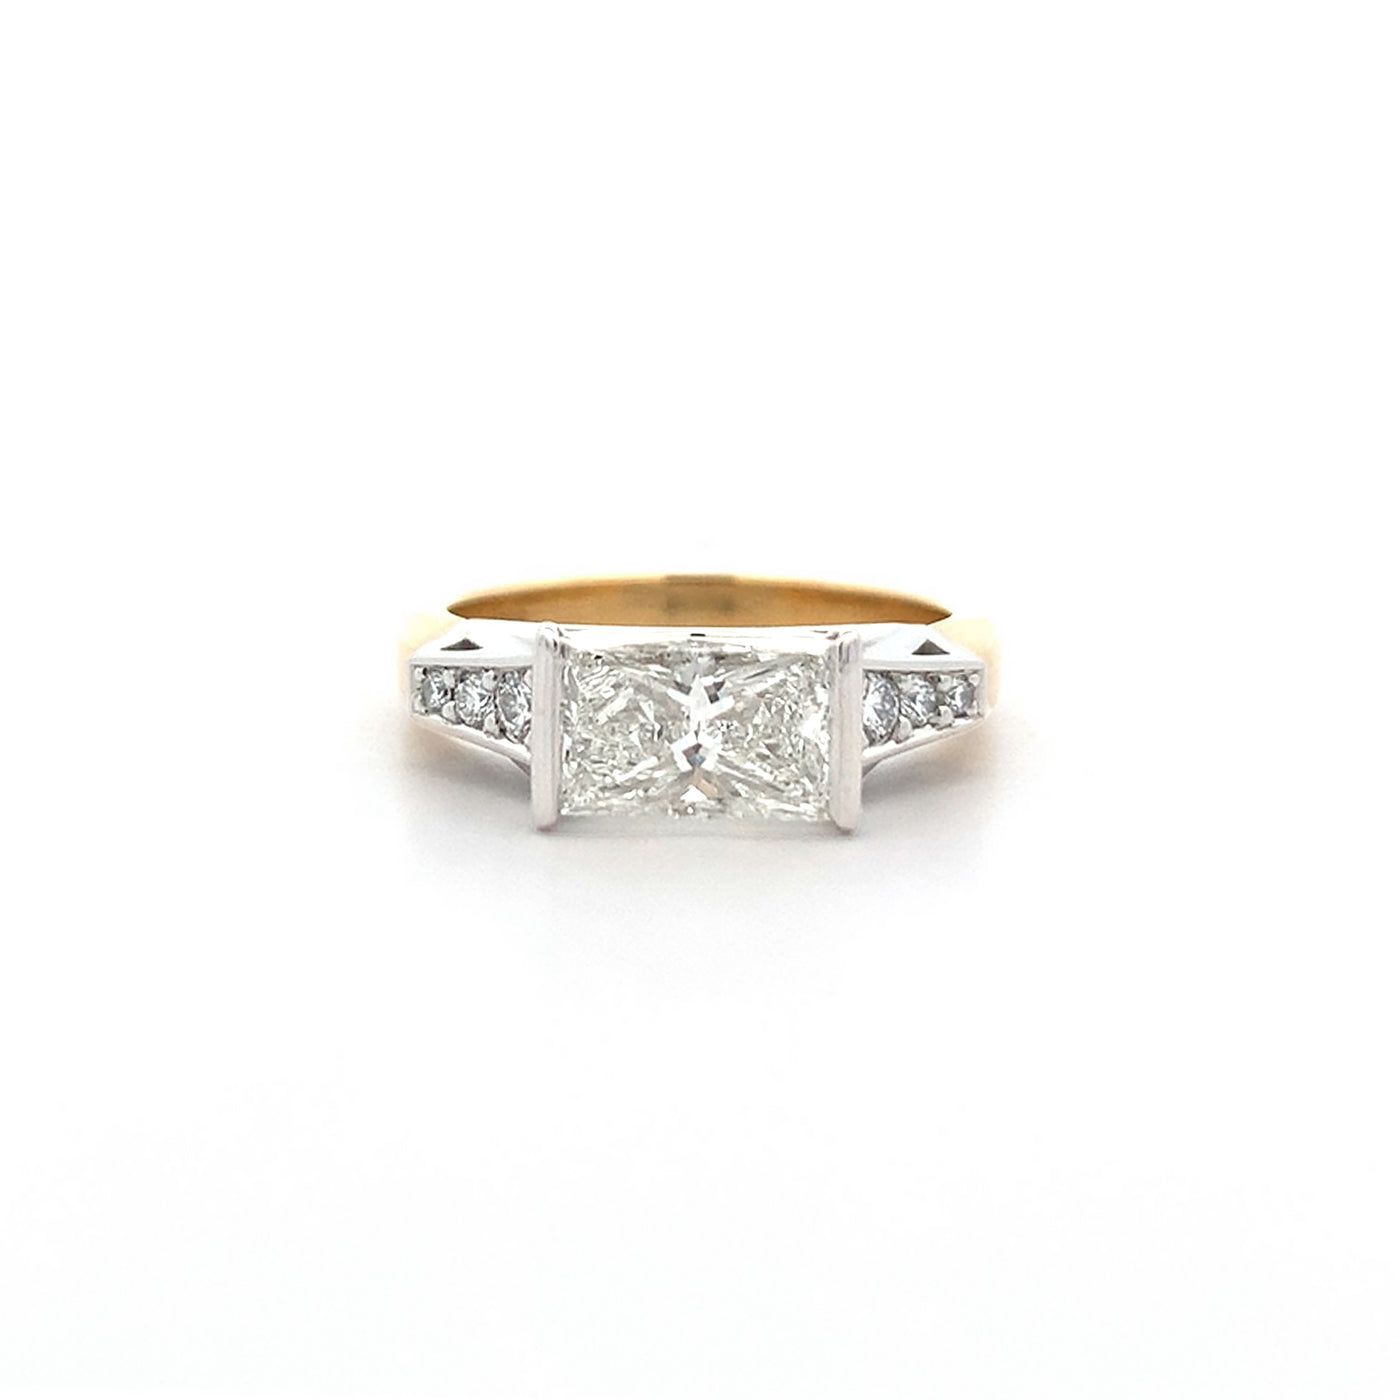 Golden Gate: Elongated Princess Cut Solitaire Ring in Yellow Gold | 1.70ct